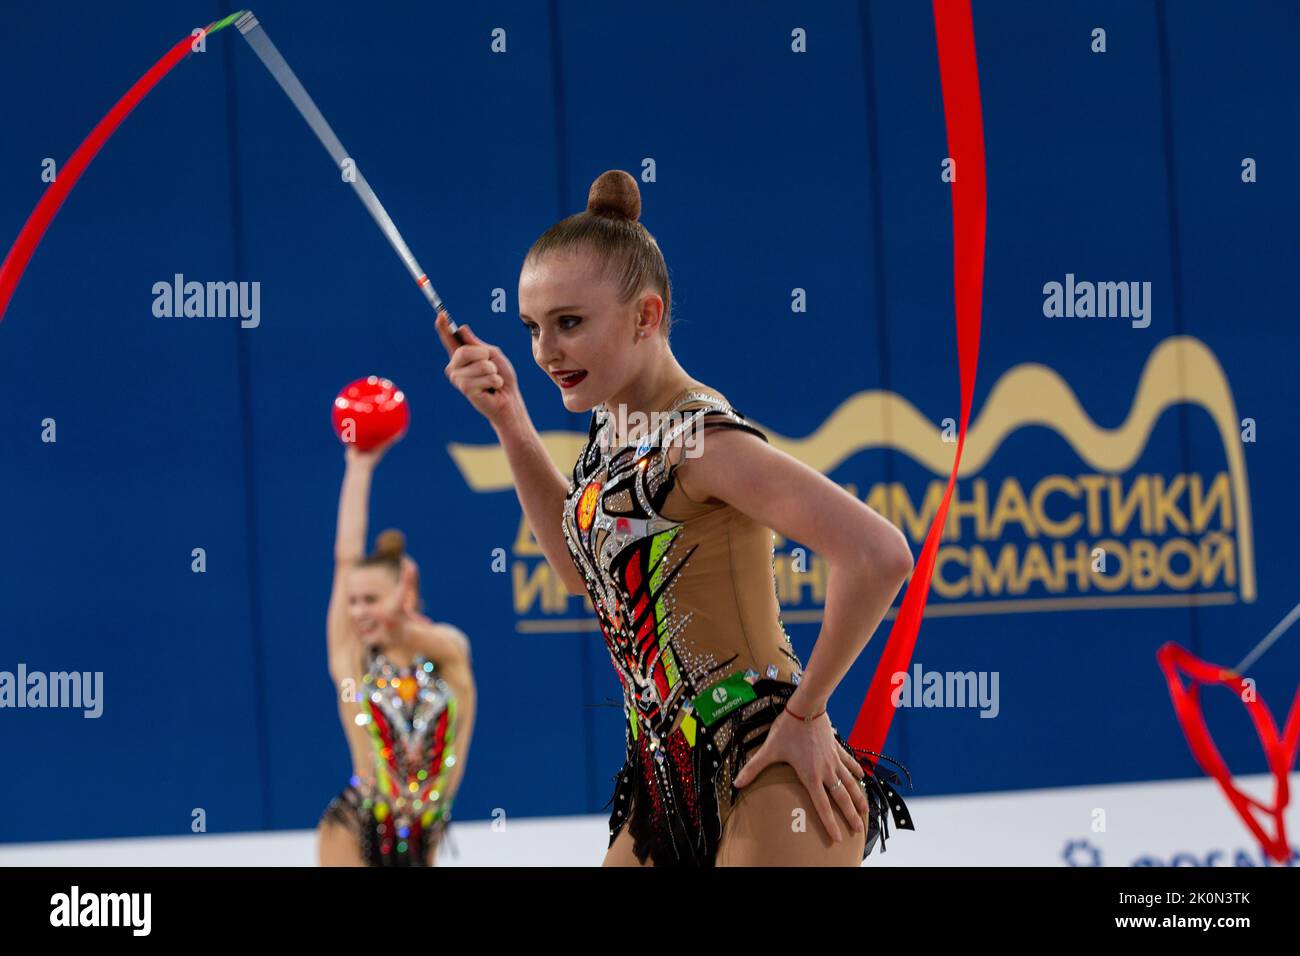 Moscow, Russia. 12th of September, 2022. Russian athletes perform in a qualification at the 2022 All-Russian Summer Spartakiad in Rhythmic Gymnastics at Irina Viner-Usmanova Gymnastics Palace in Luzhniki in Moscow, Russia. Nikolay Vinokurov/Alamy Live News Stock Photo